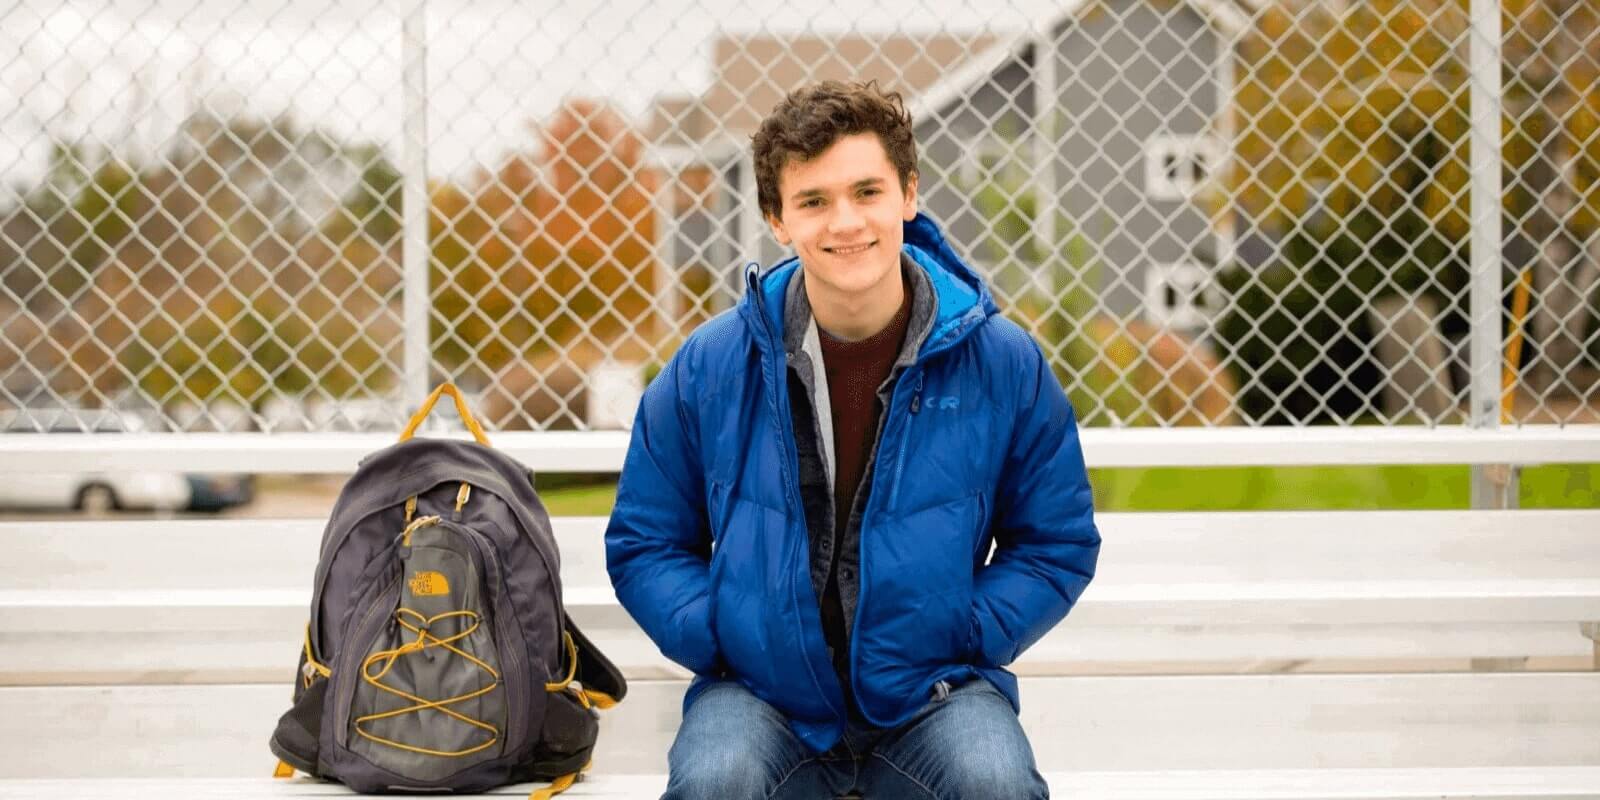 A teen boy smiling at the camera while sitting on a school bench